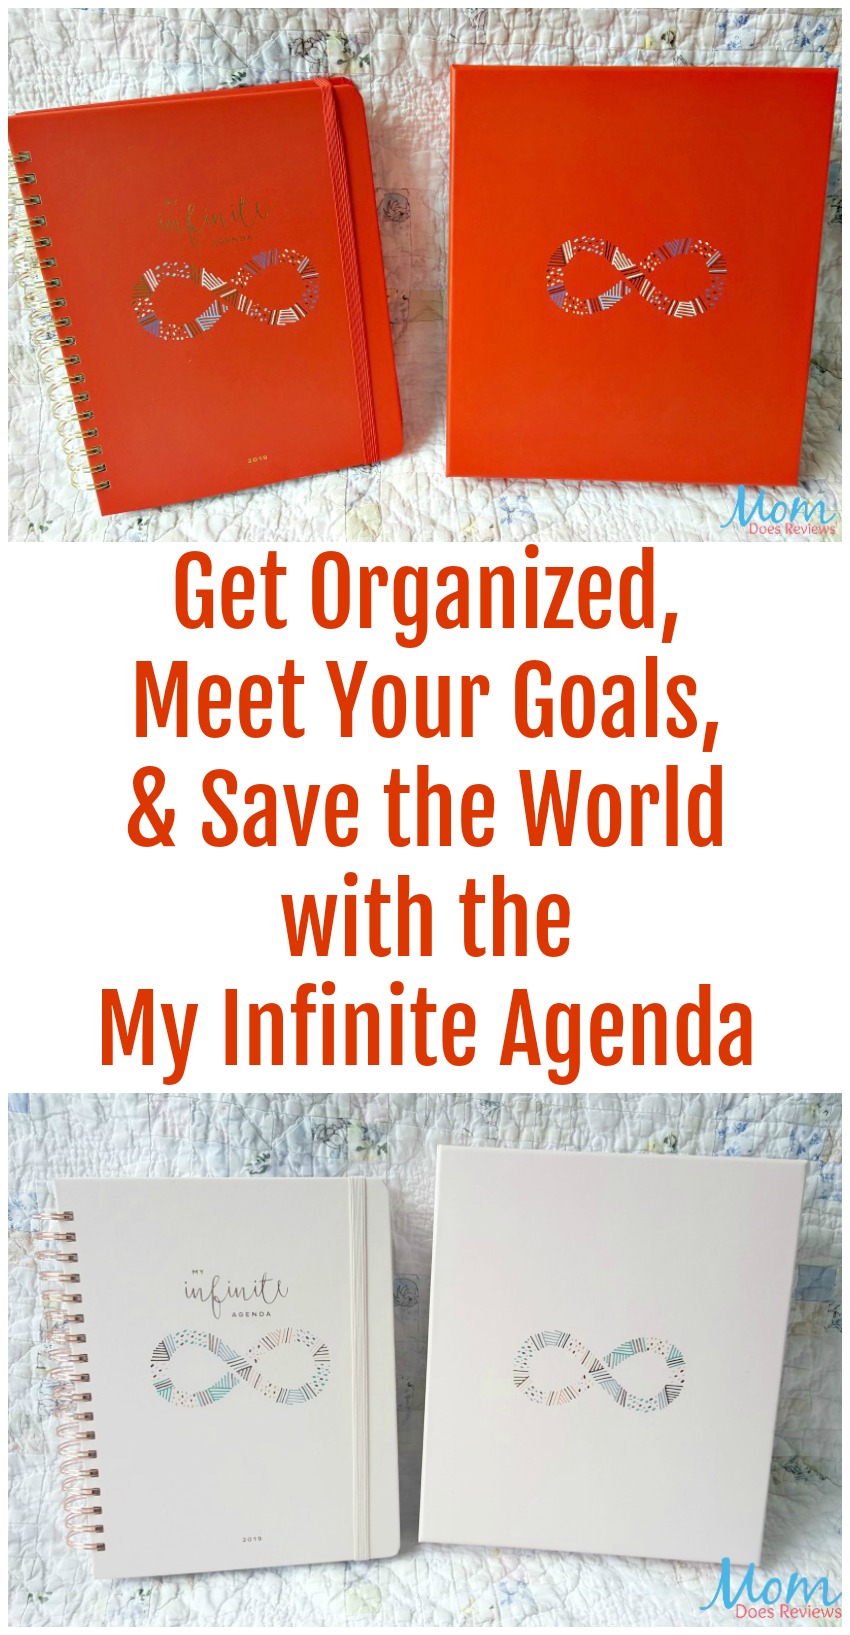 Get Organized, Meet Your Goals, and Save the World with the My Infinite Agenda